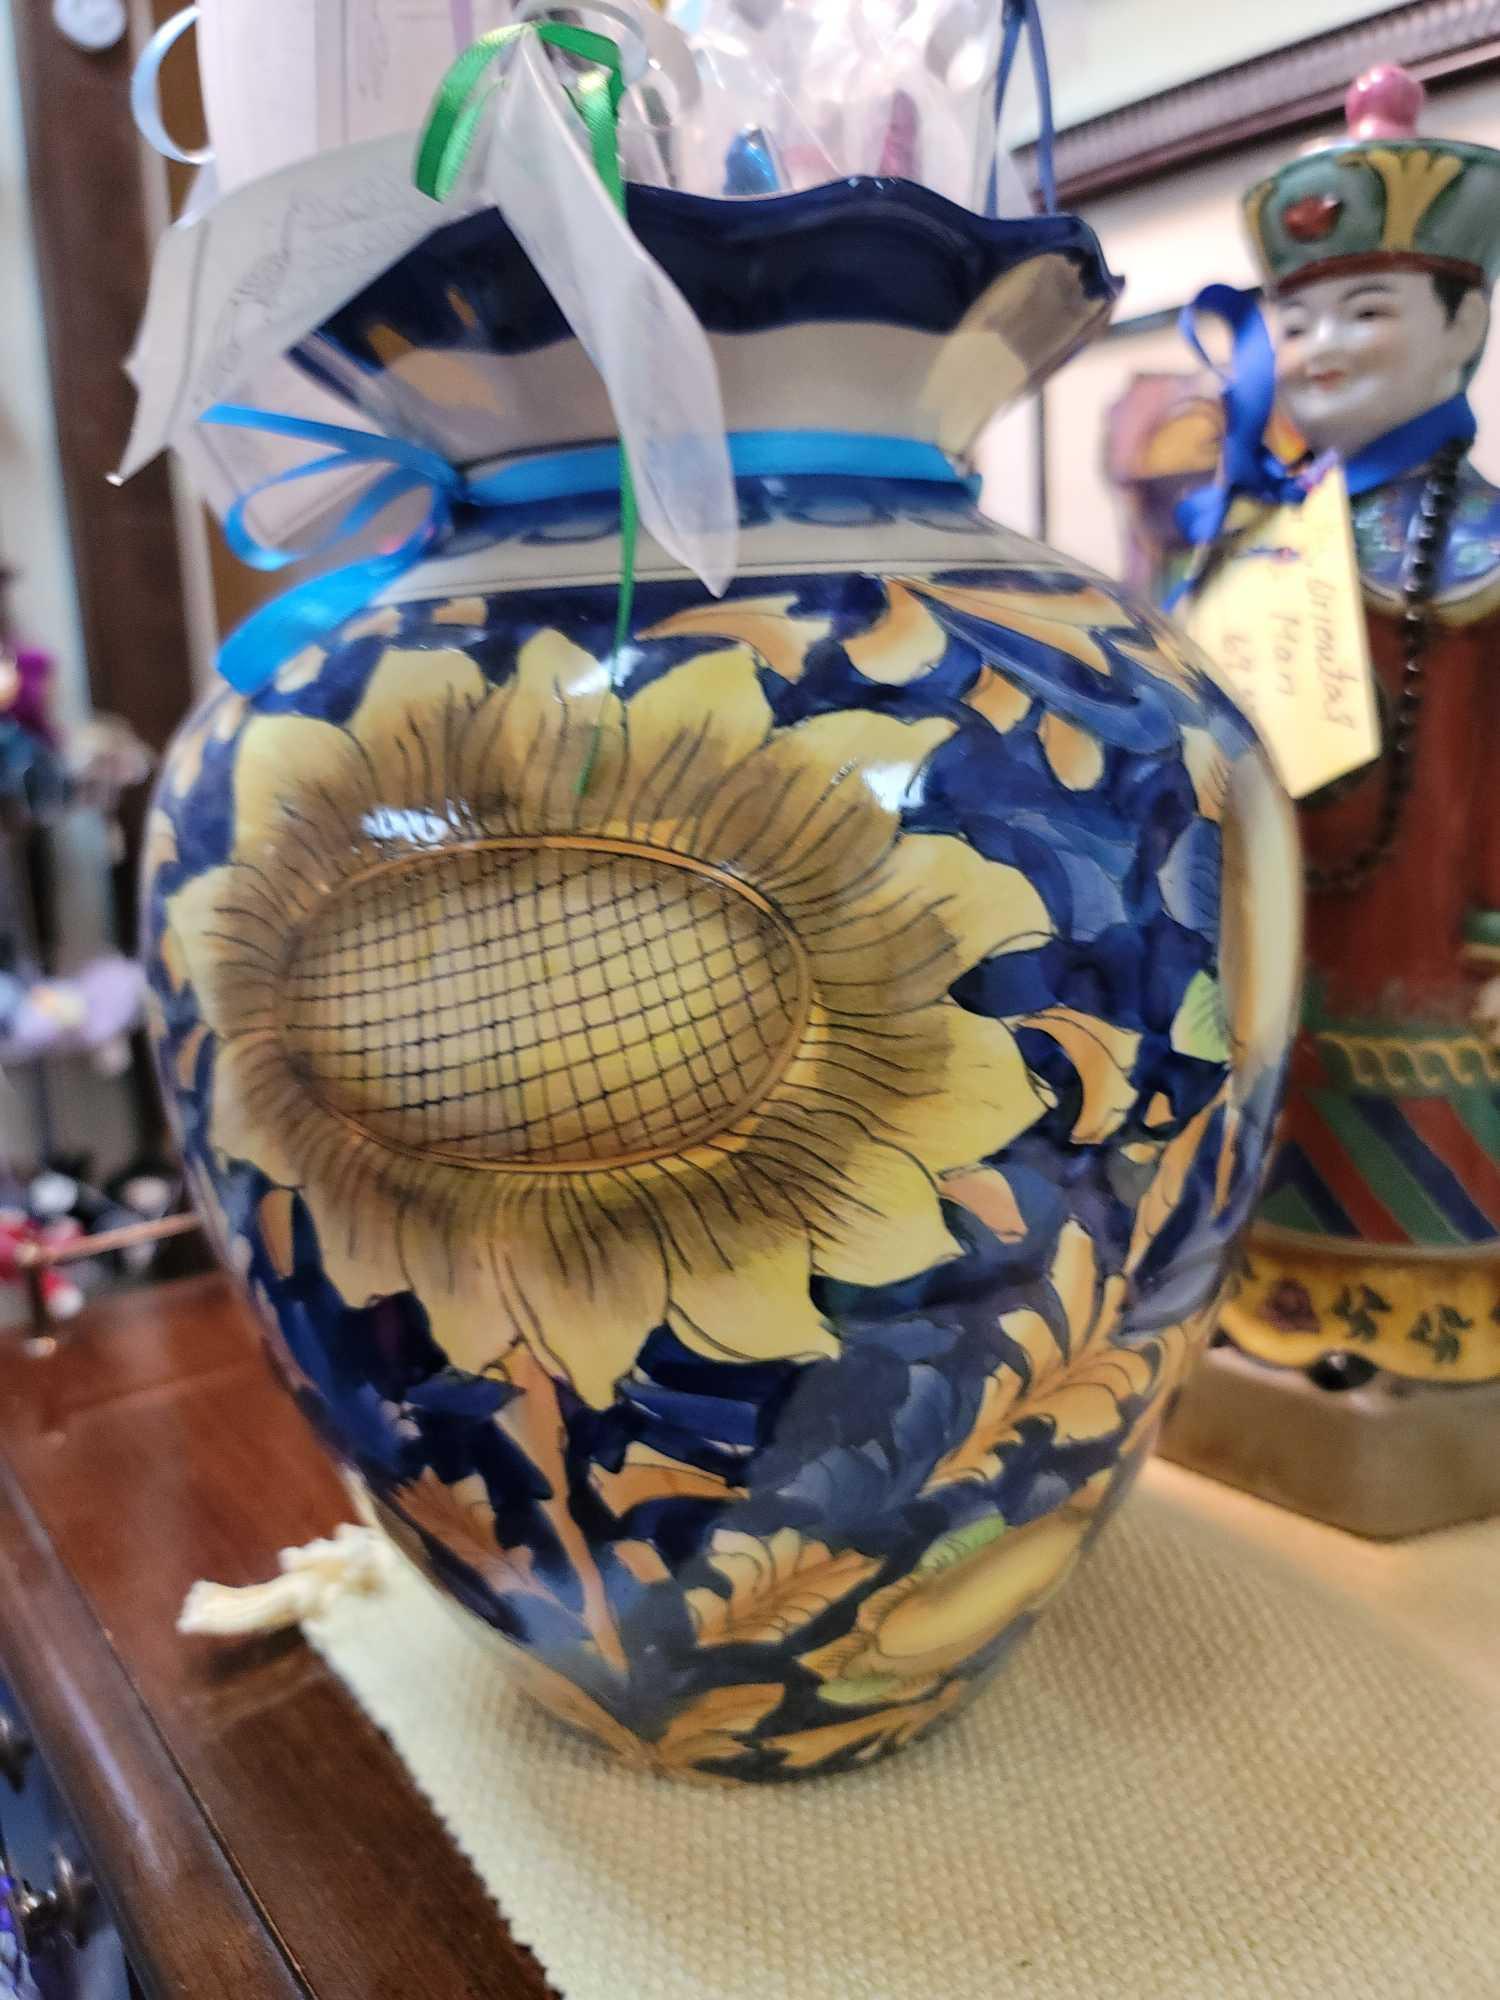 (RM1) BLUE AND YELLOW SUNFLOWER AND FRUIT VASE FILLED WITH 10 HANDMADE PAPER MAGIC WANDS-